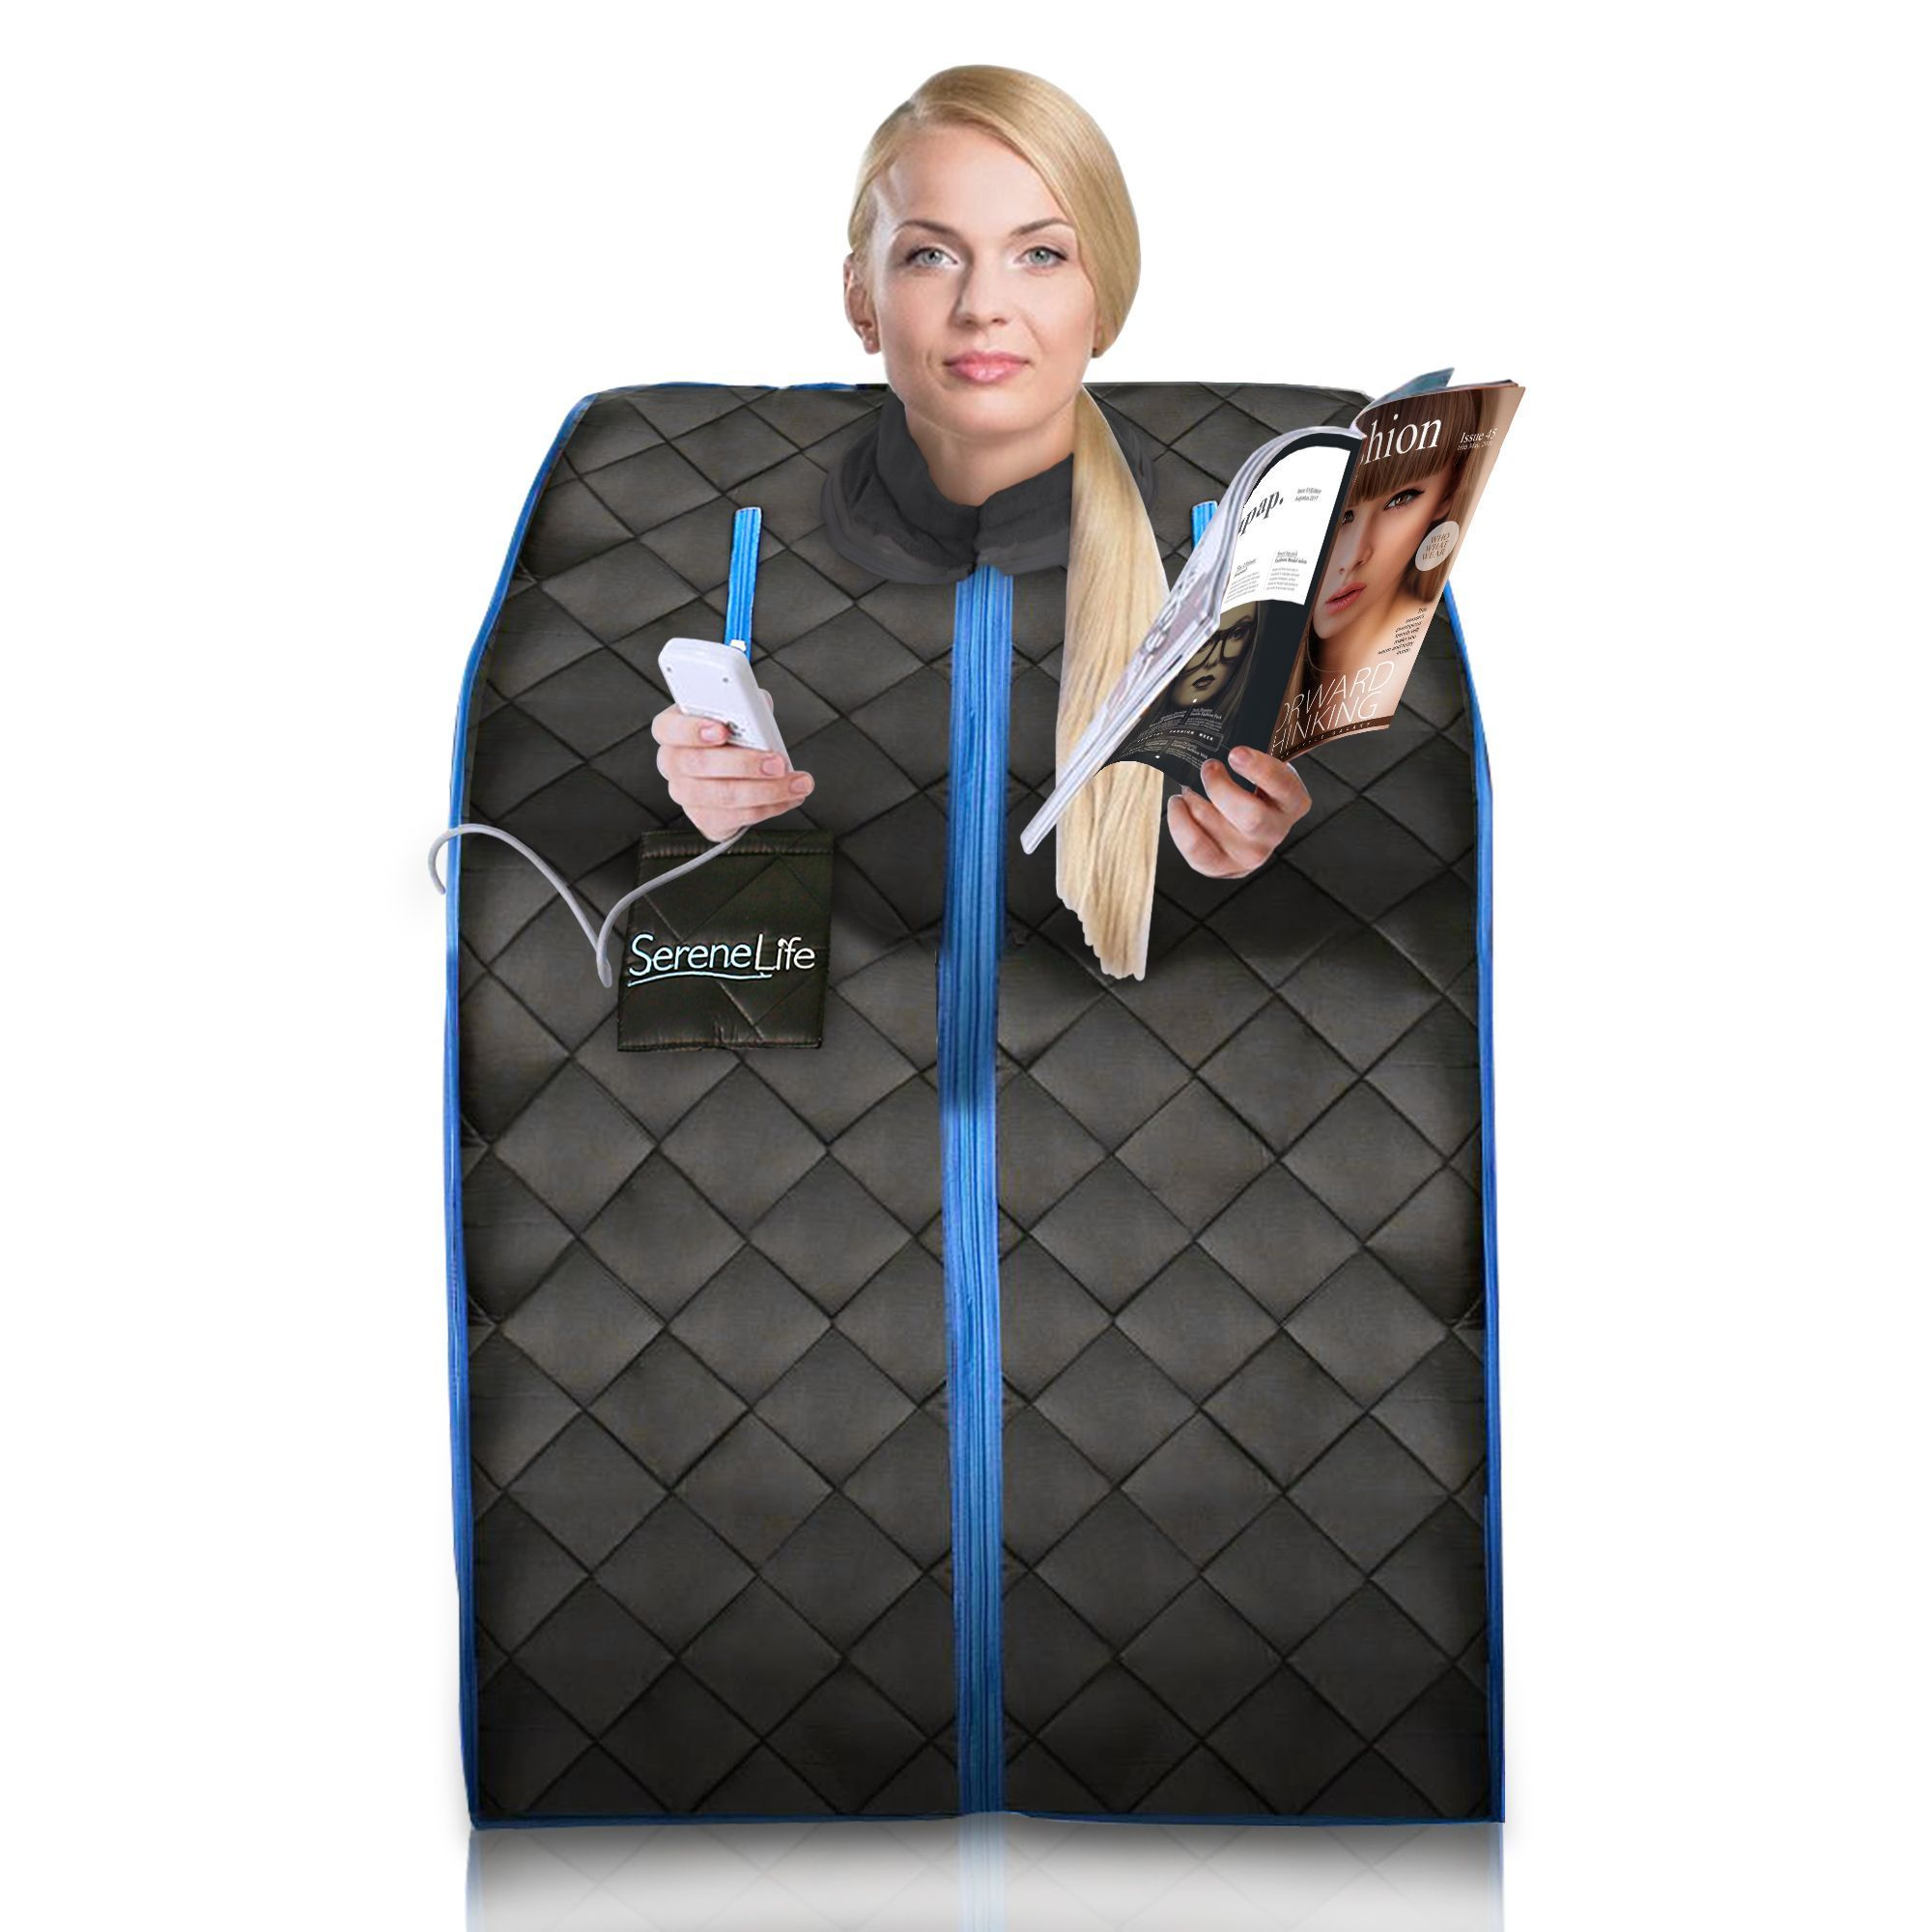 SereneLife Portable Infrared Home Spa | One Person Sauna | Heating Foot Pad and Foldable Chair